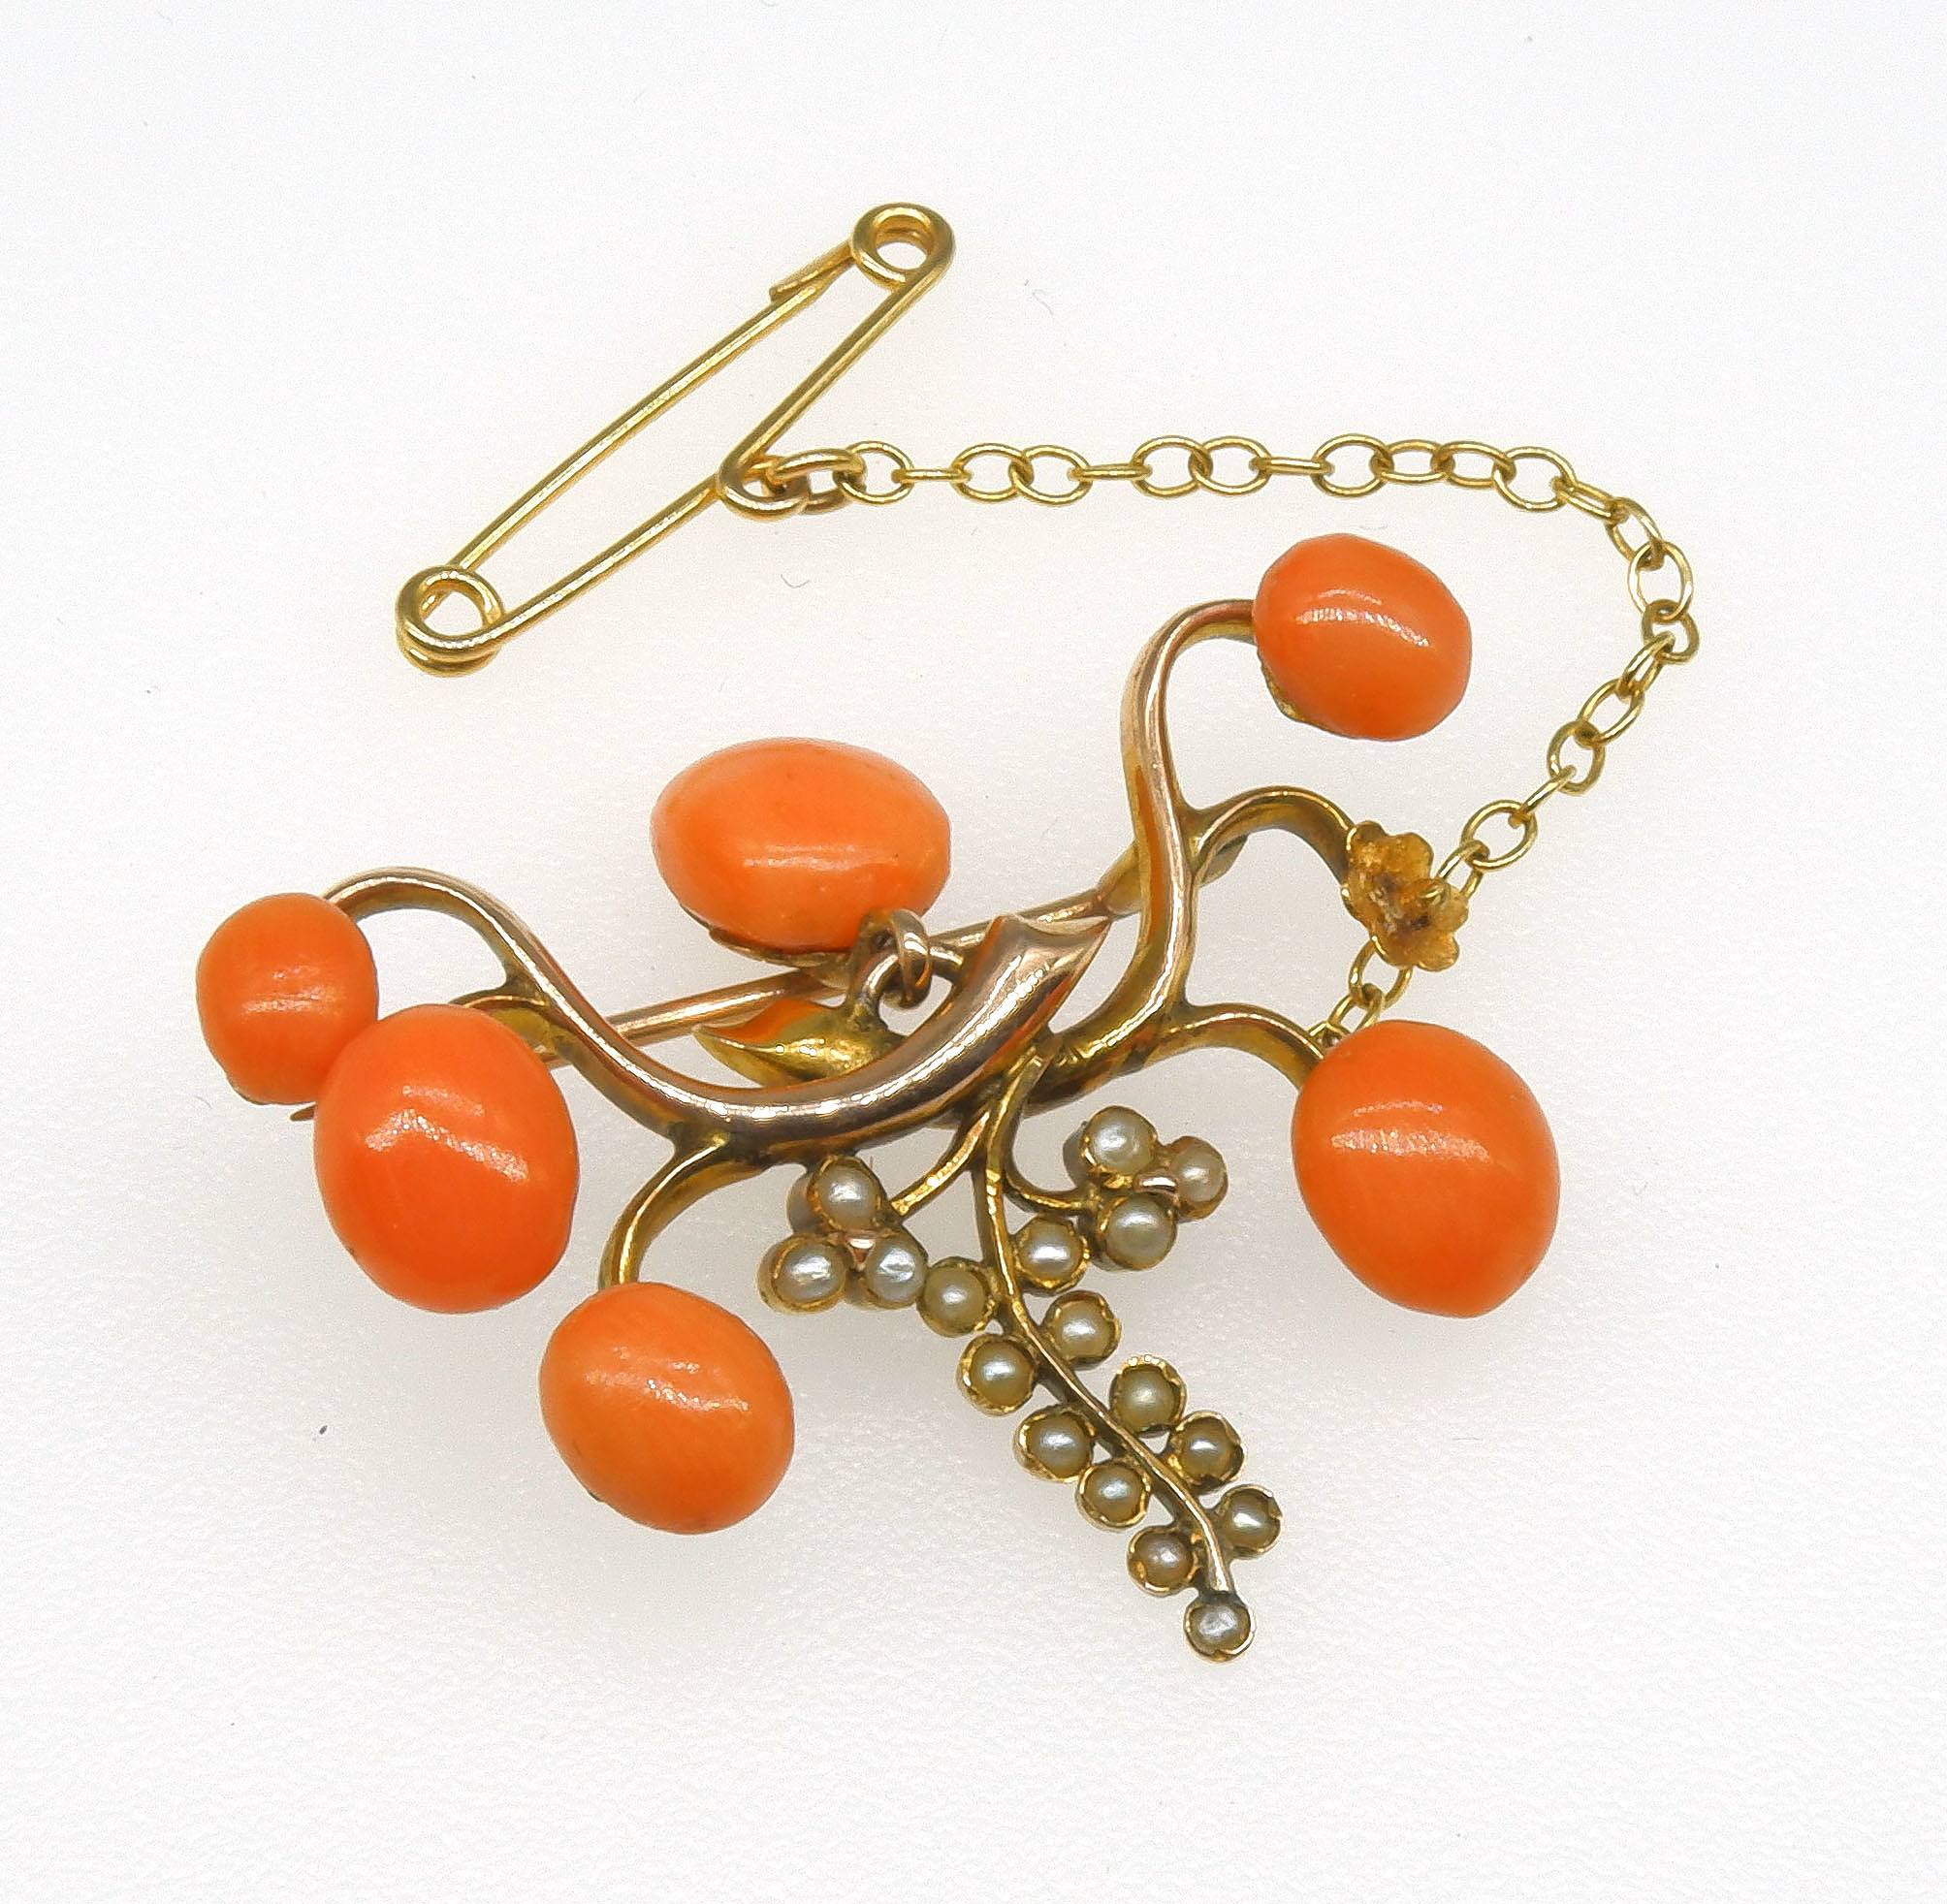 '14ct Yellow Gold Pale Orange Natural Coral and Seed Pearl Gape Vine Designed Brooch'